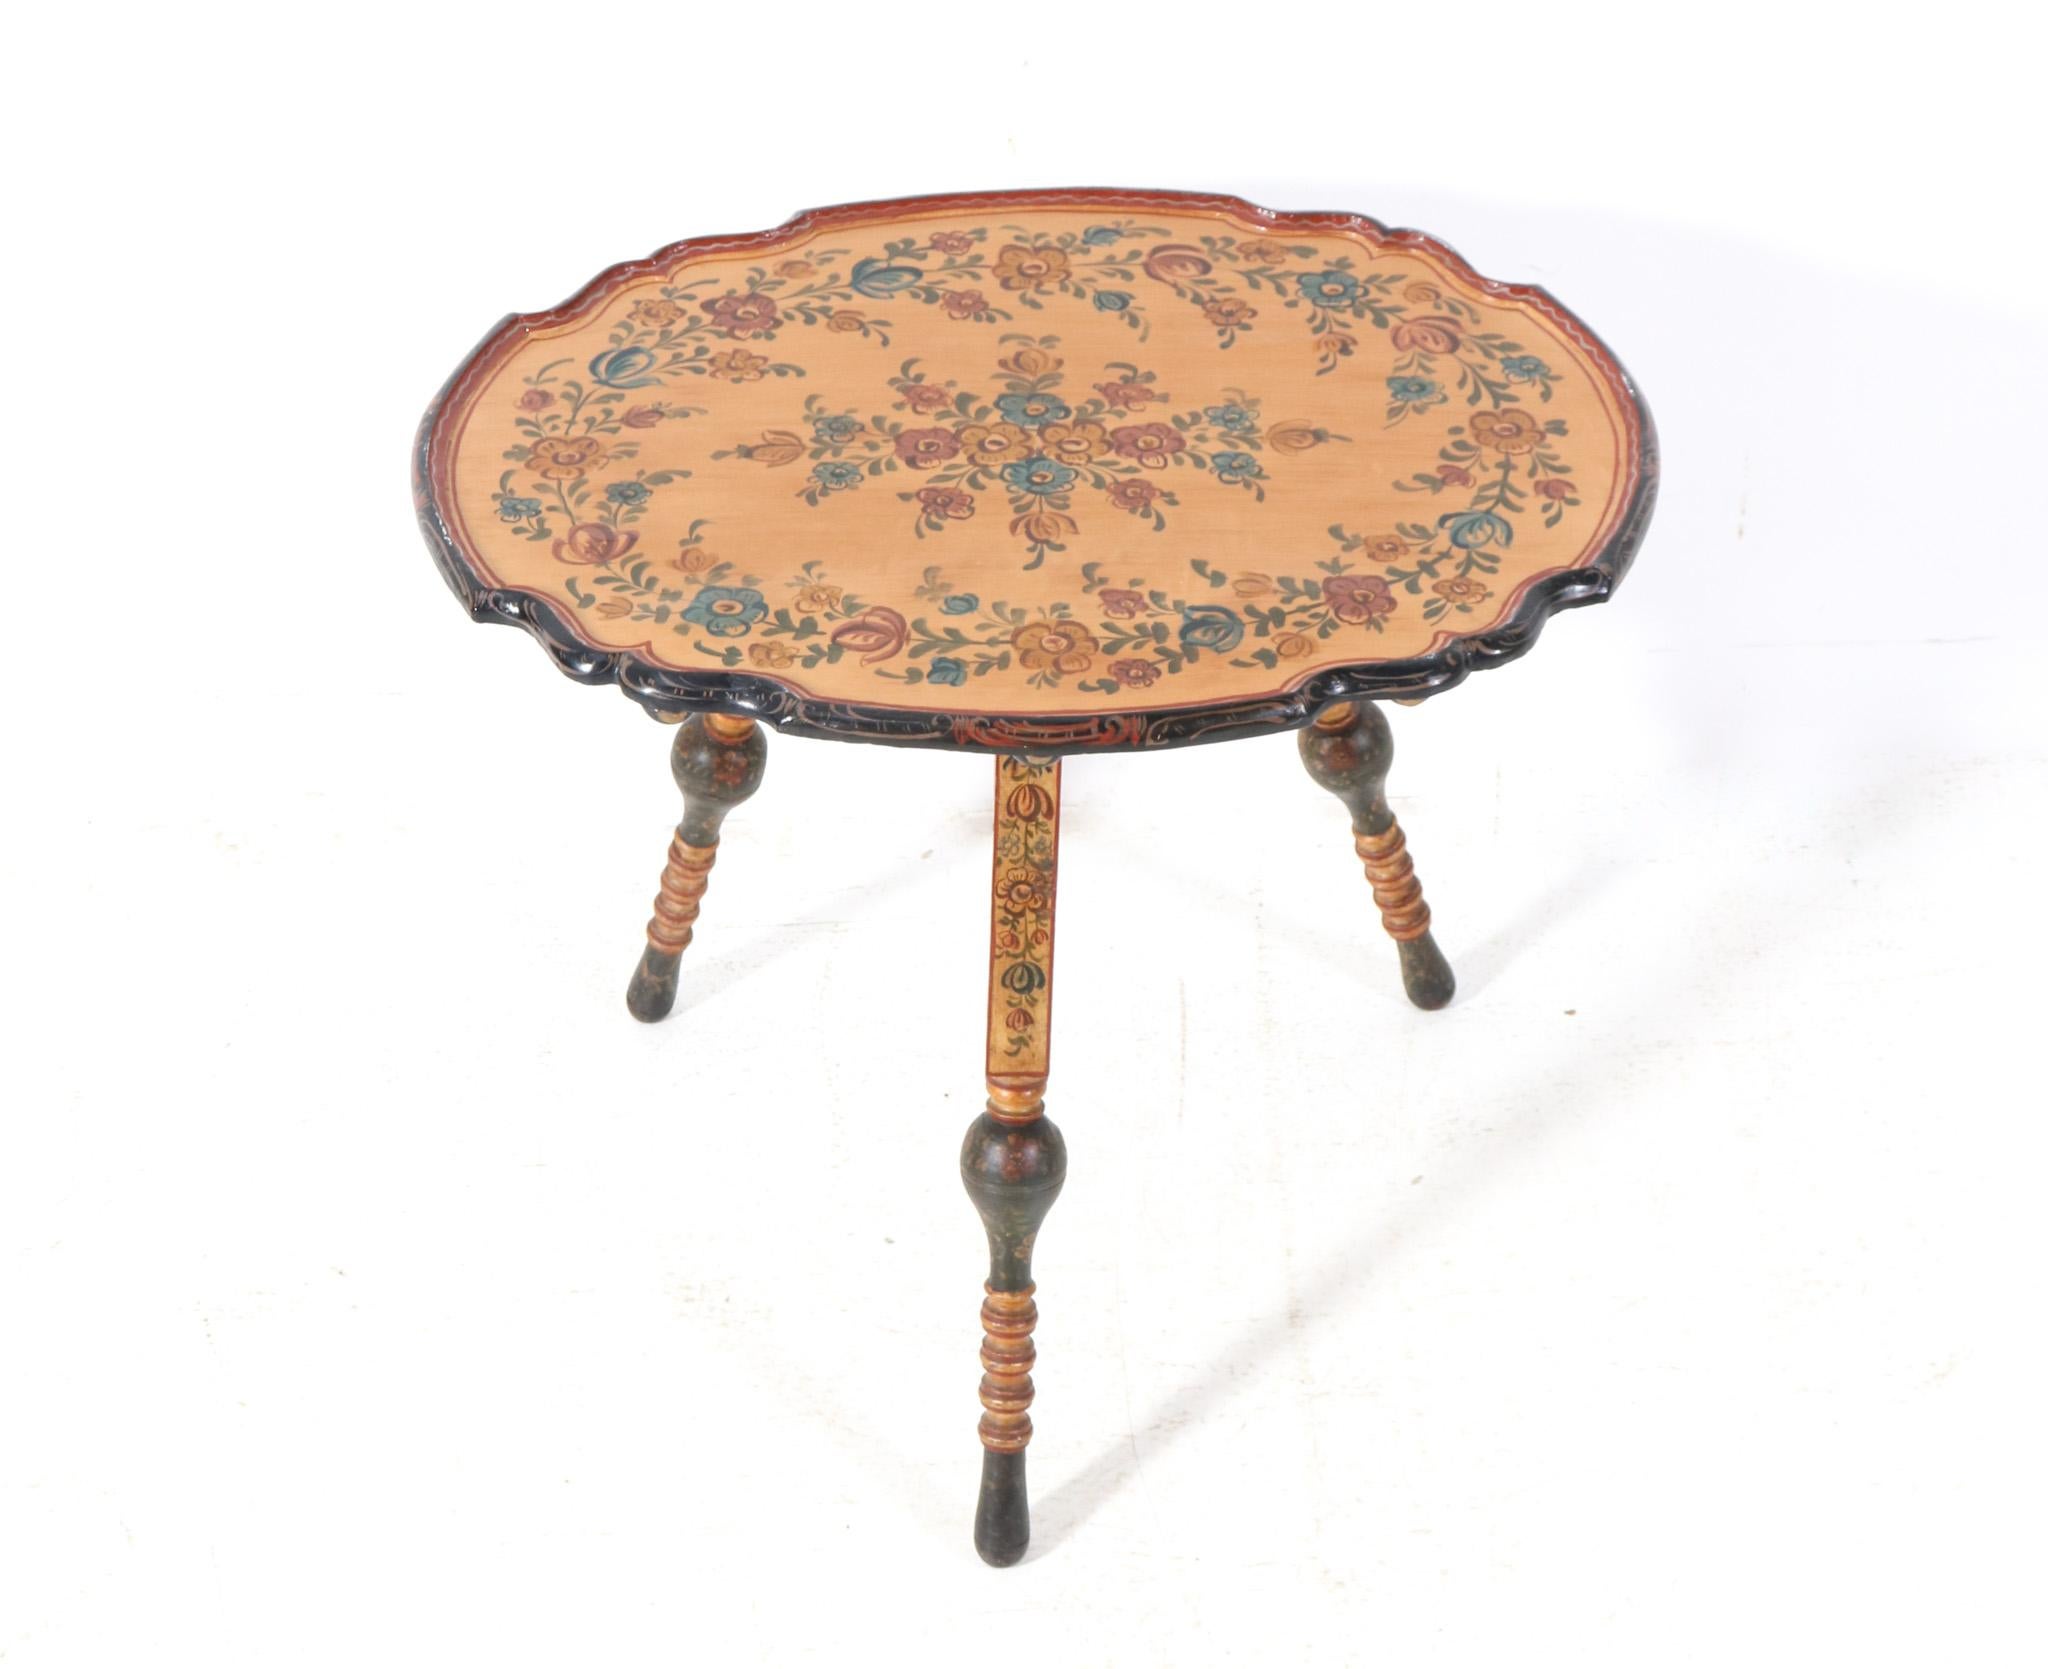 Early 20th Century Dutch Folk Art Hindeloopen Painted Tilt Top Table, 1900s For Sale